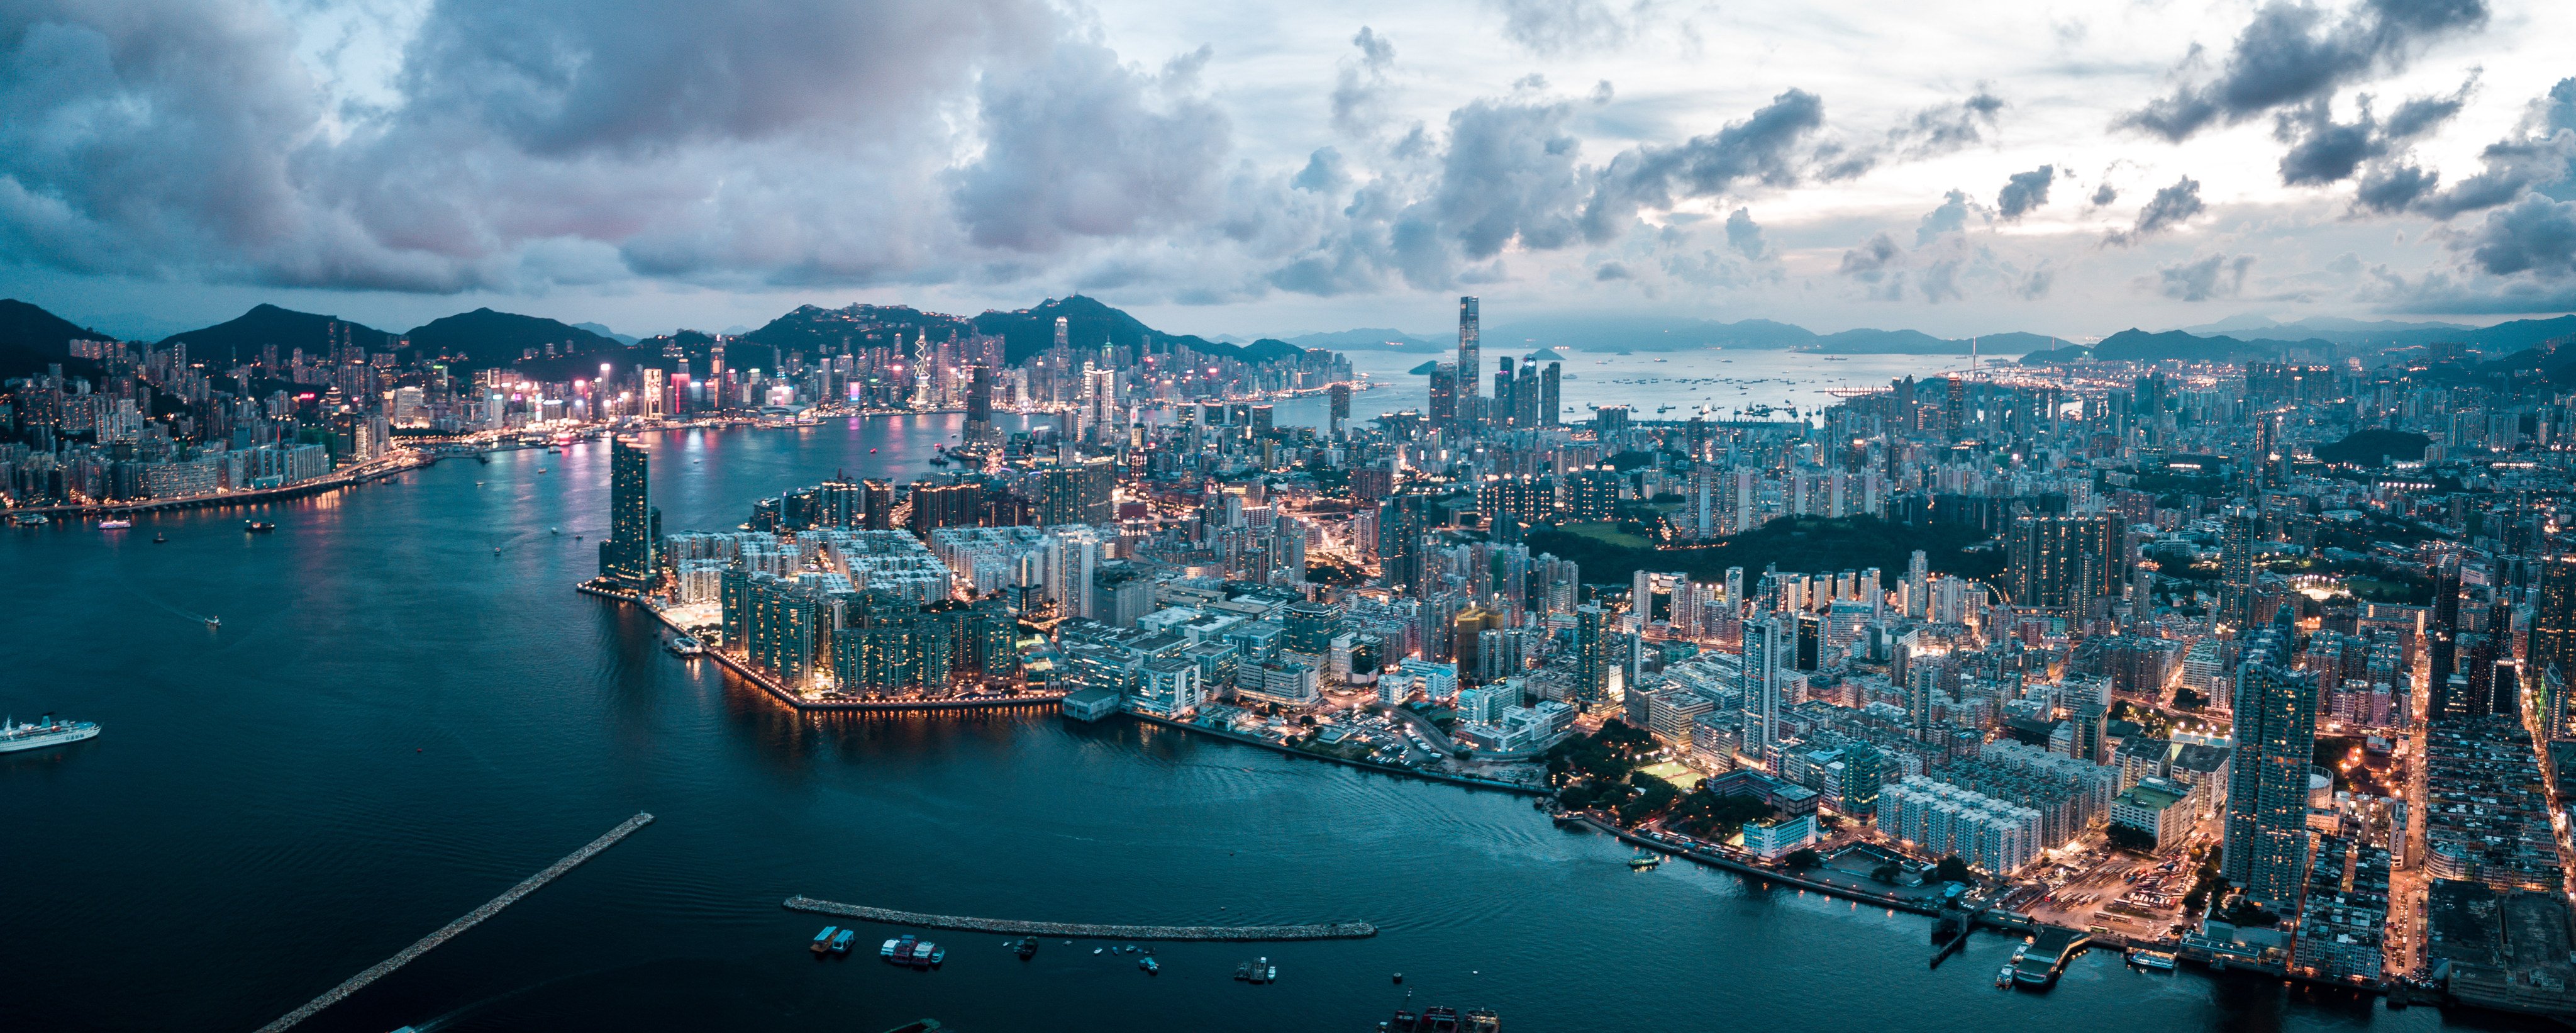 An aerial view of Hong Kong Island and Kowloon. Photo: Shutterstock